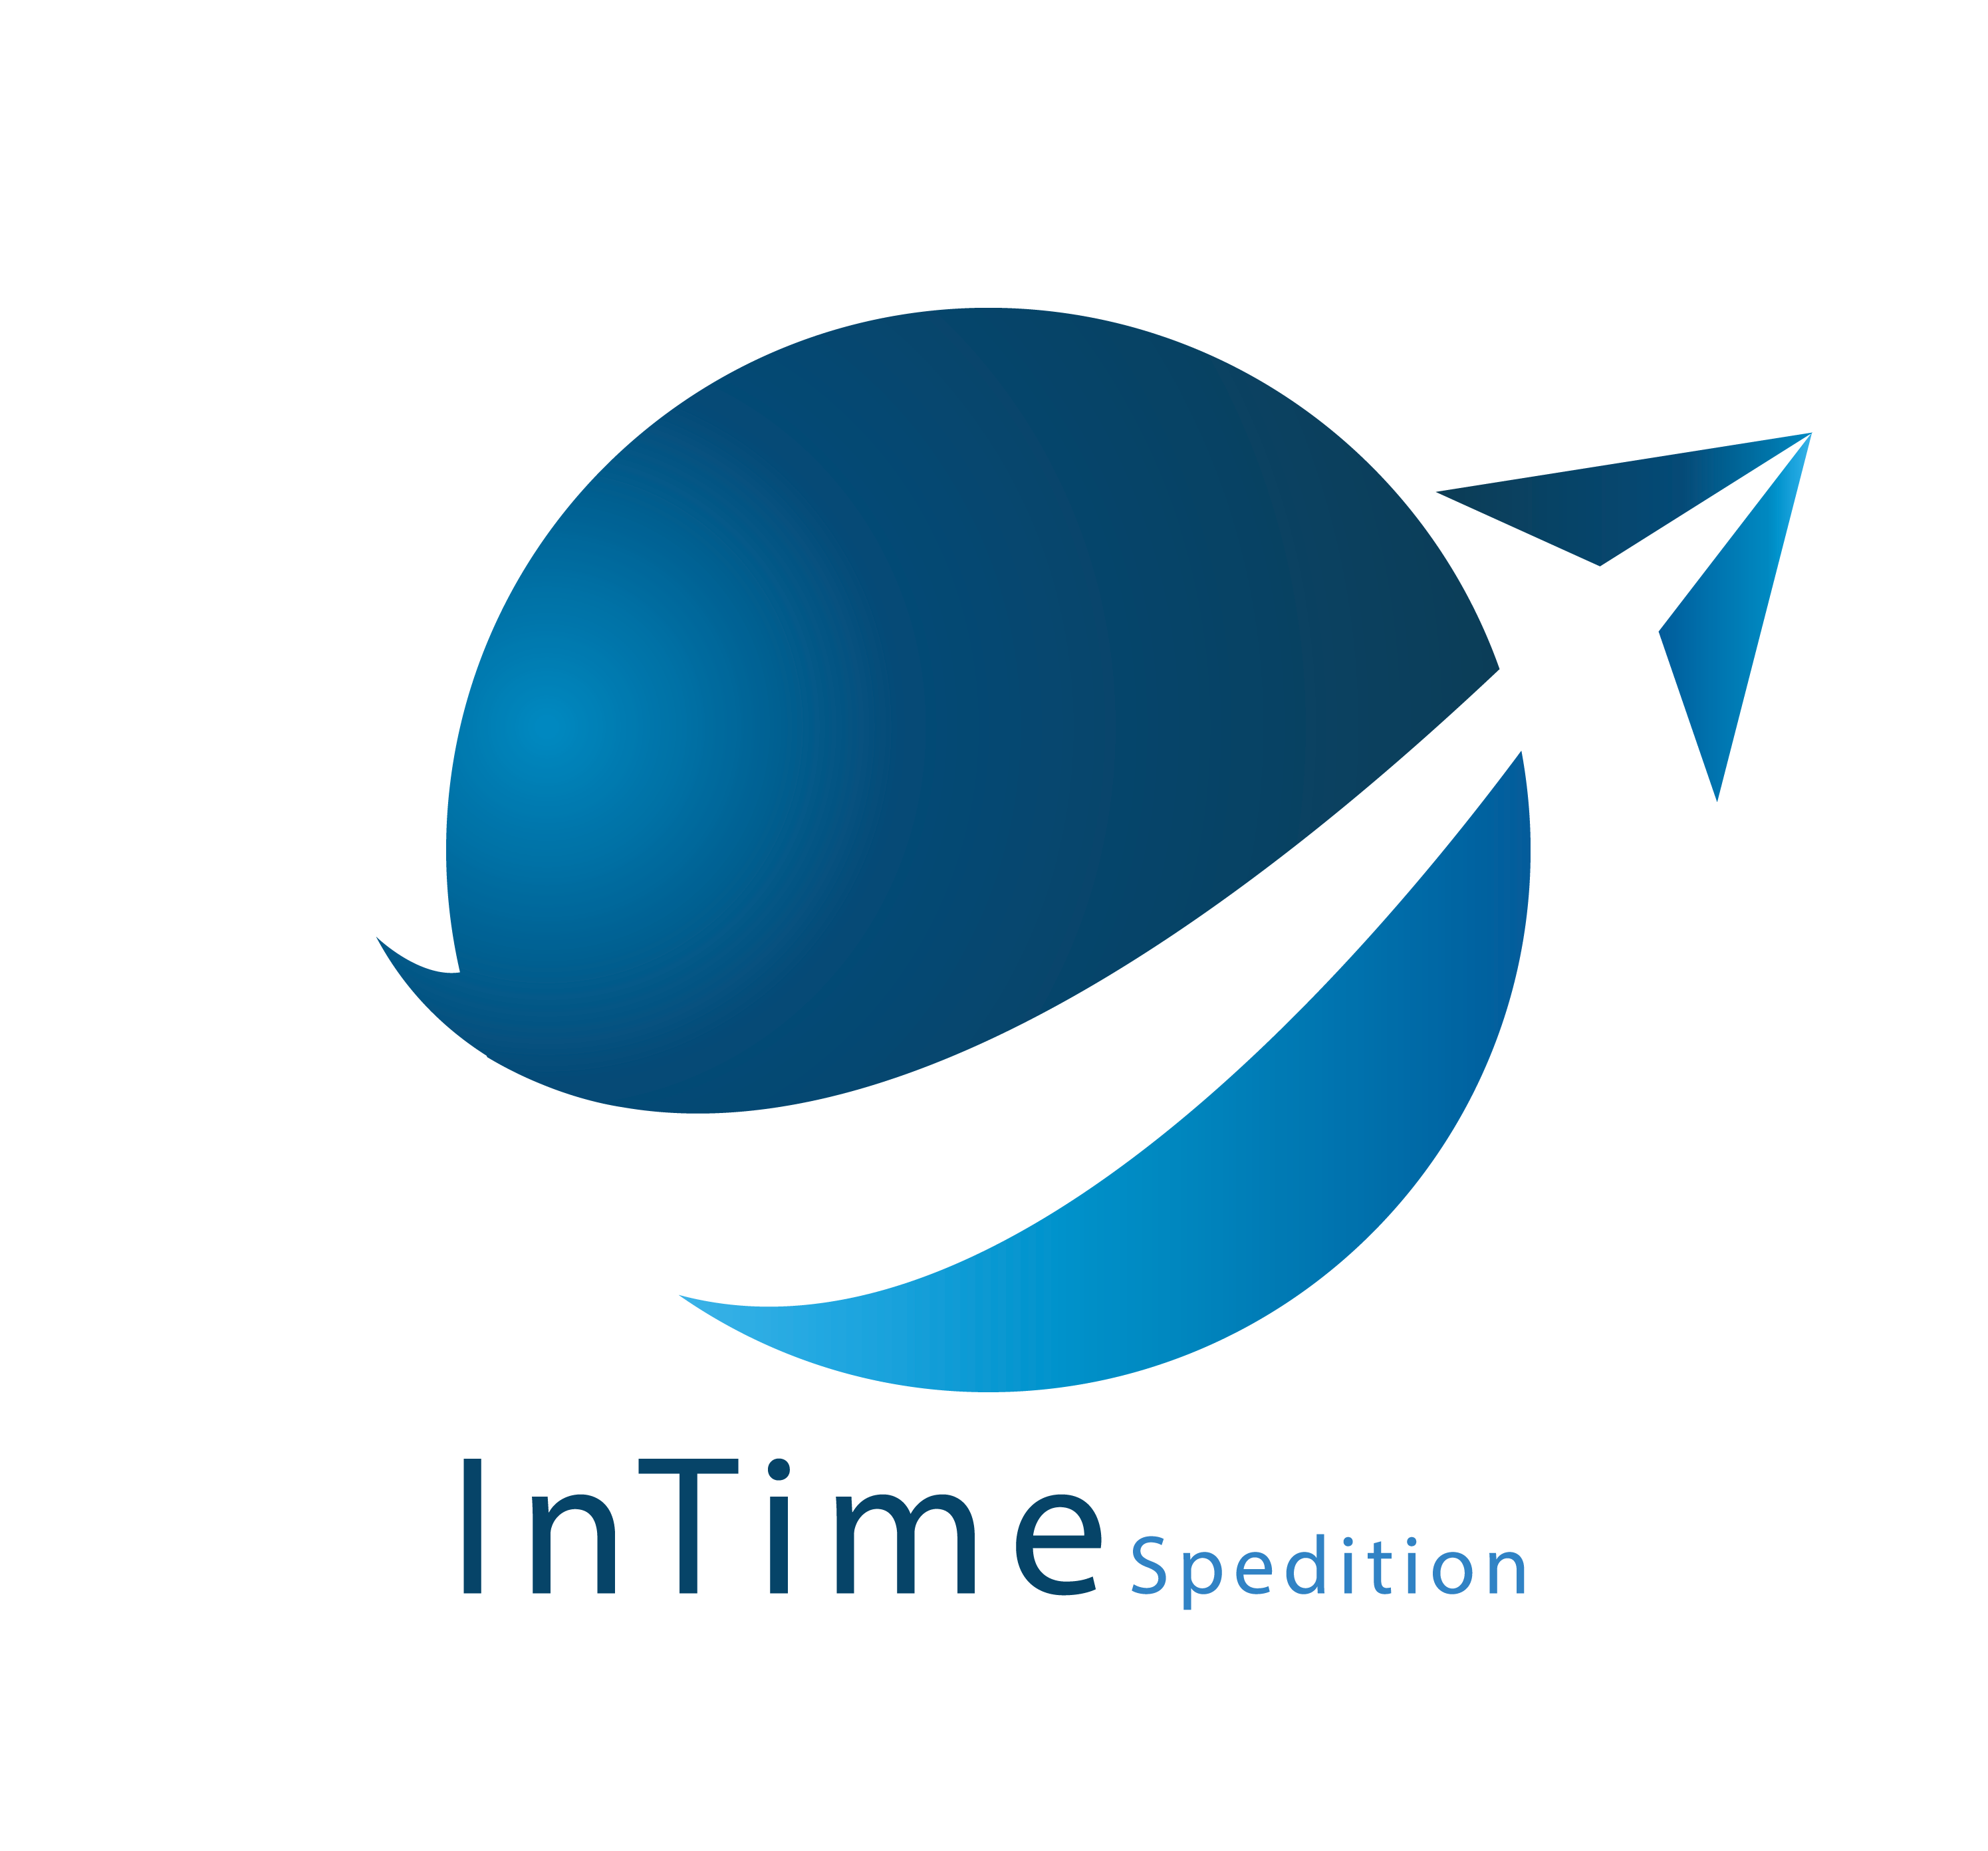 InTime Spedition